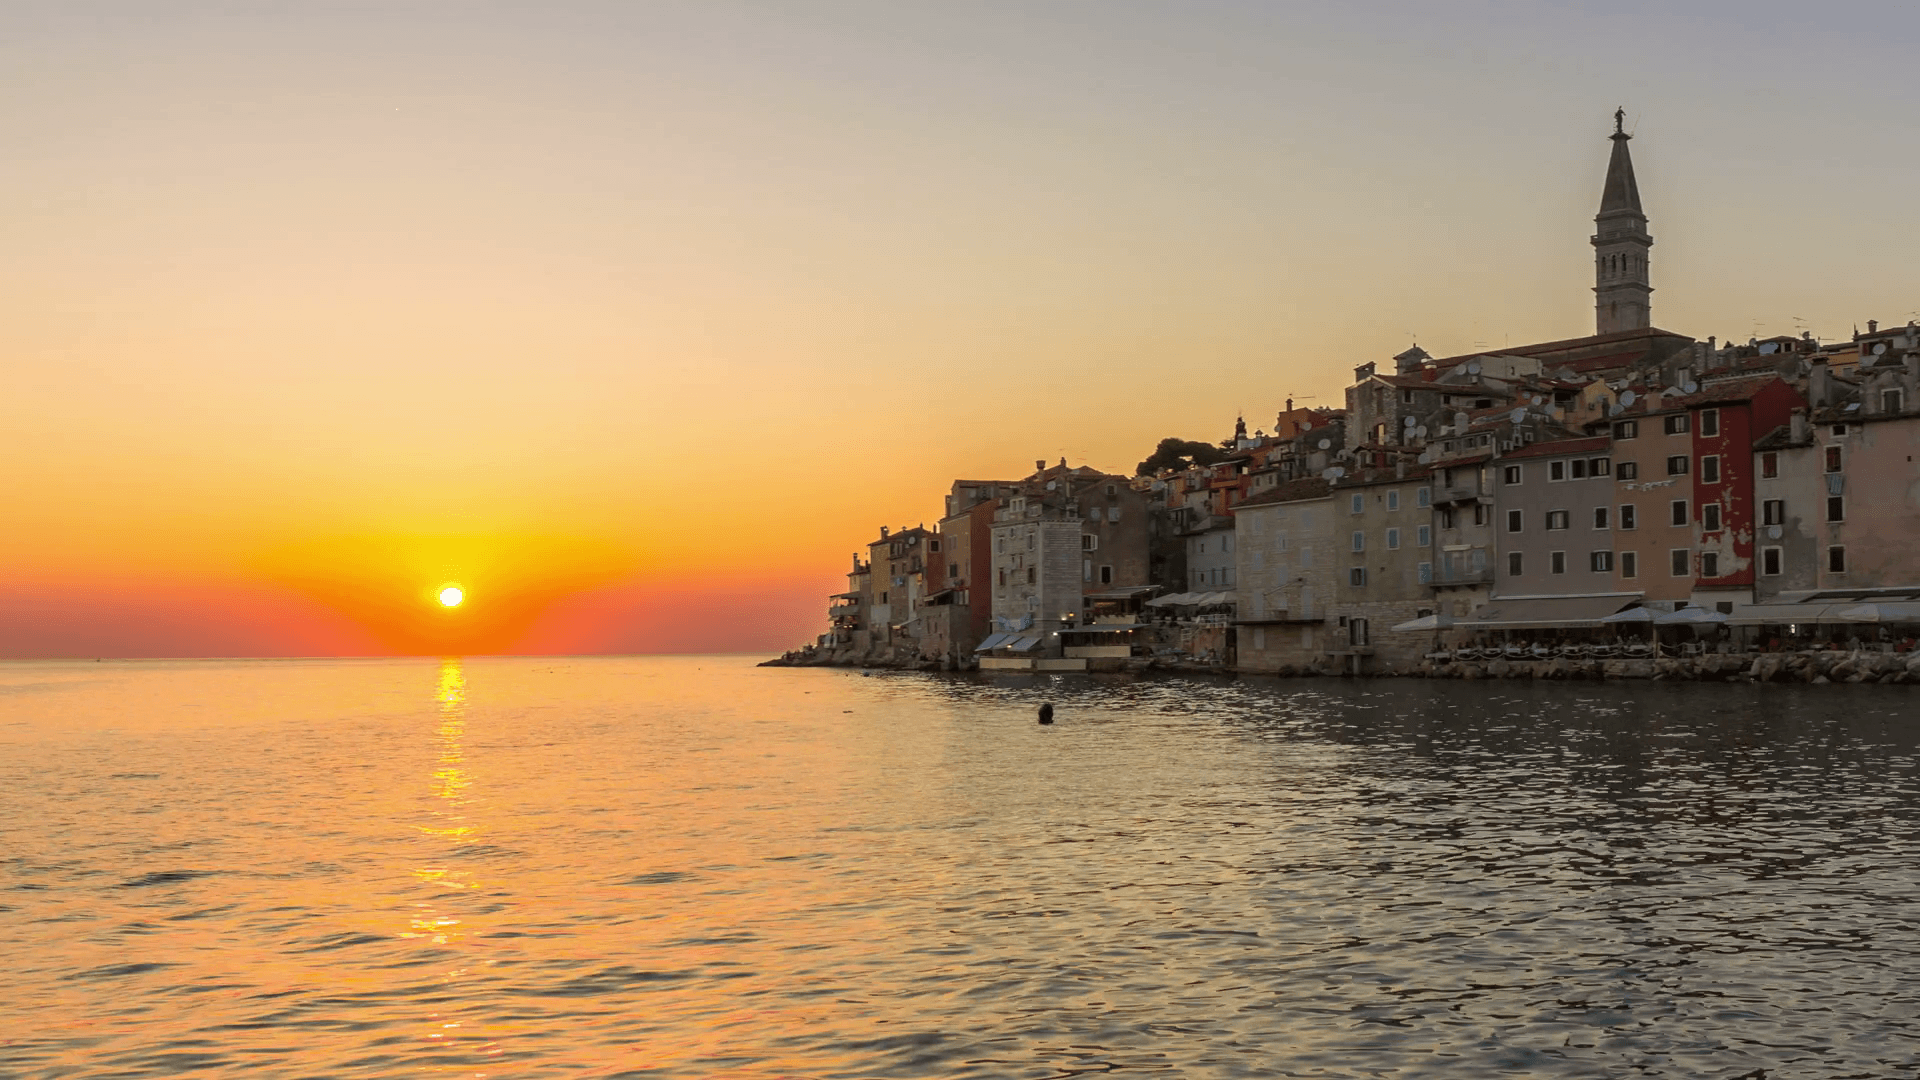 Sunset time lapse at Rovinj, Croatia view of old town of Rovinj in Istria, Croatia at beautiful colorful sunset sky. Rovinj is popular